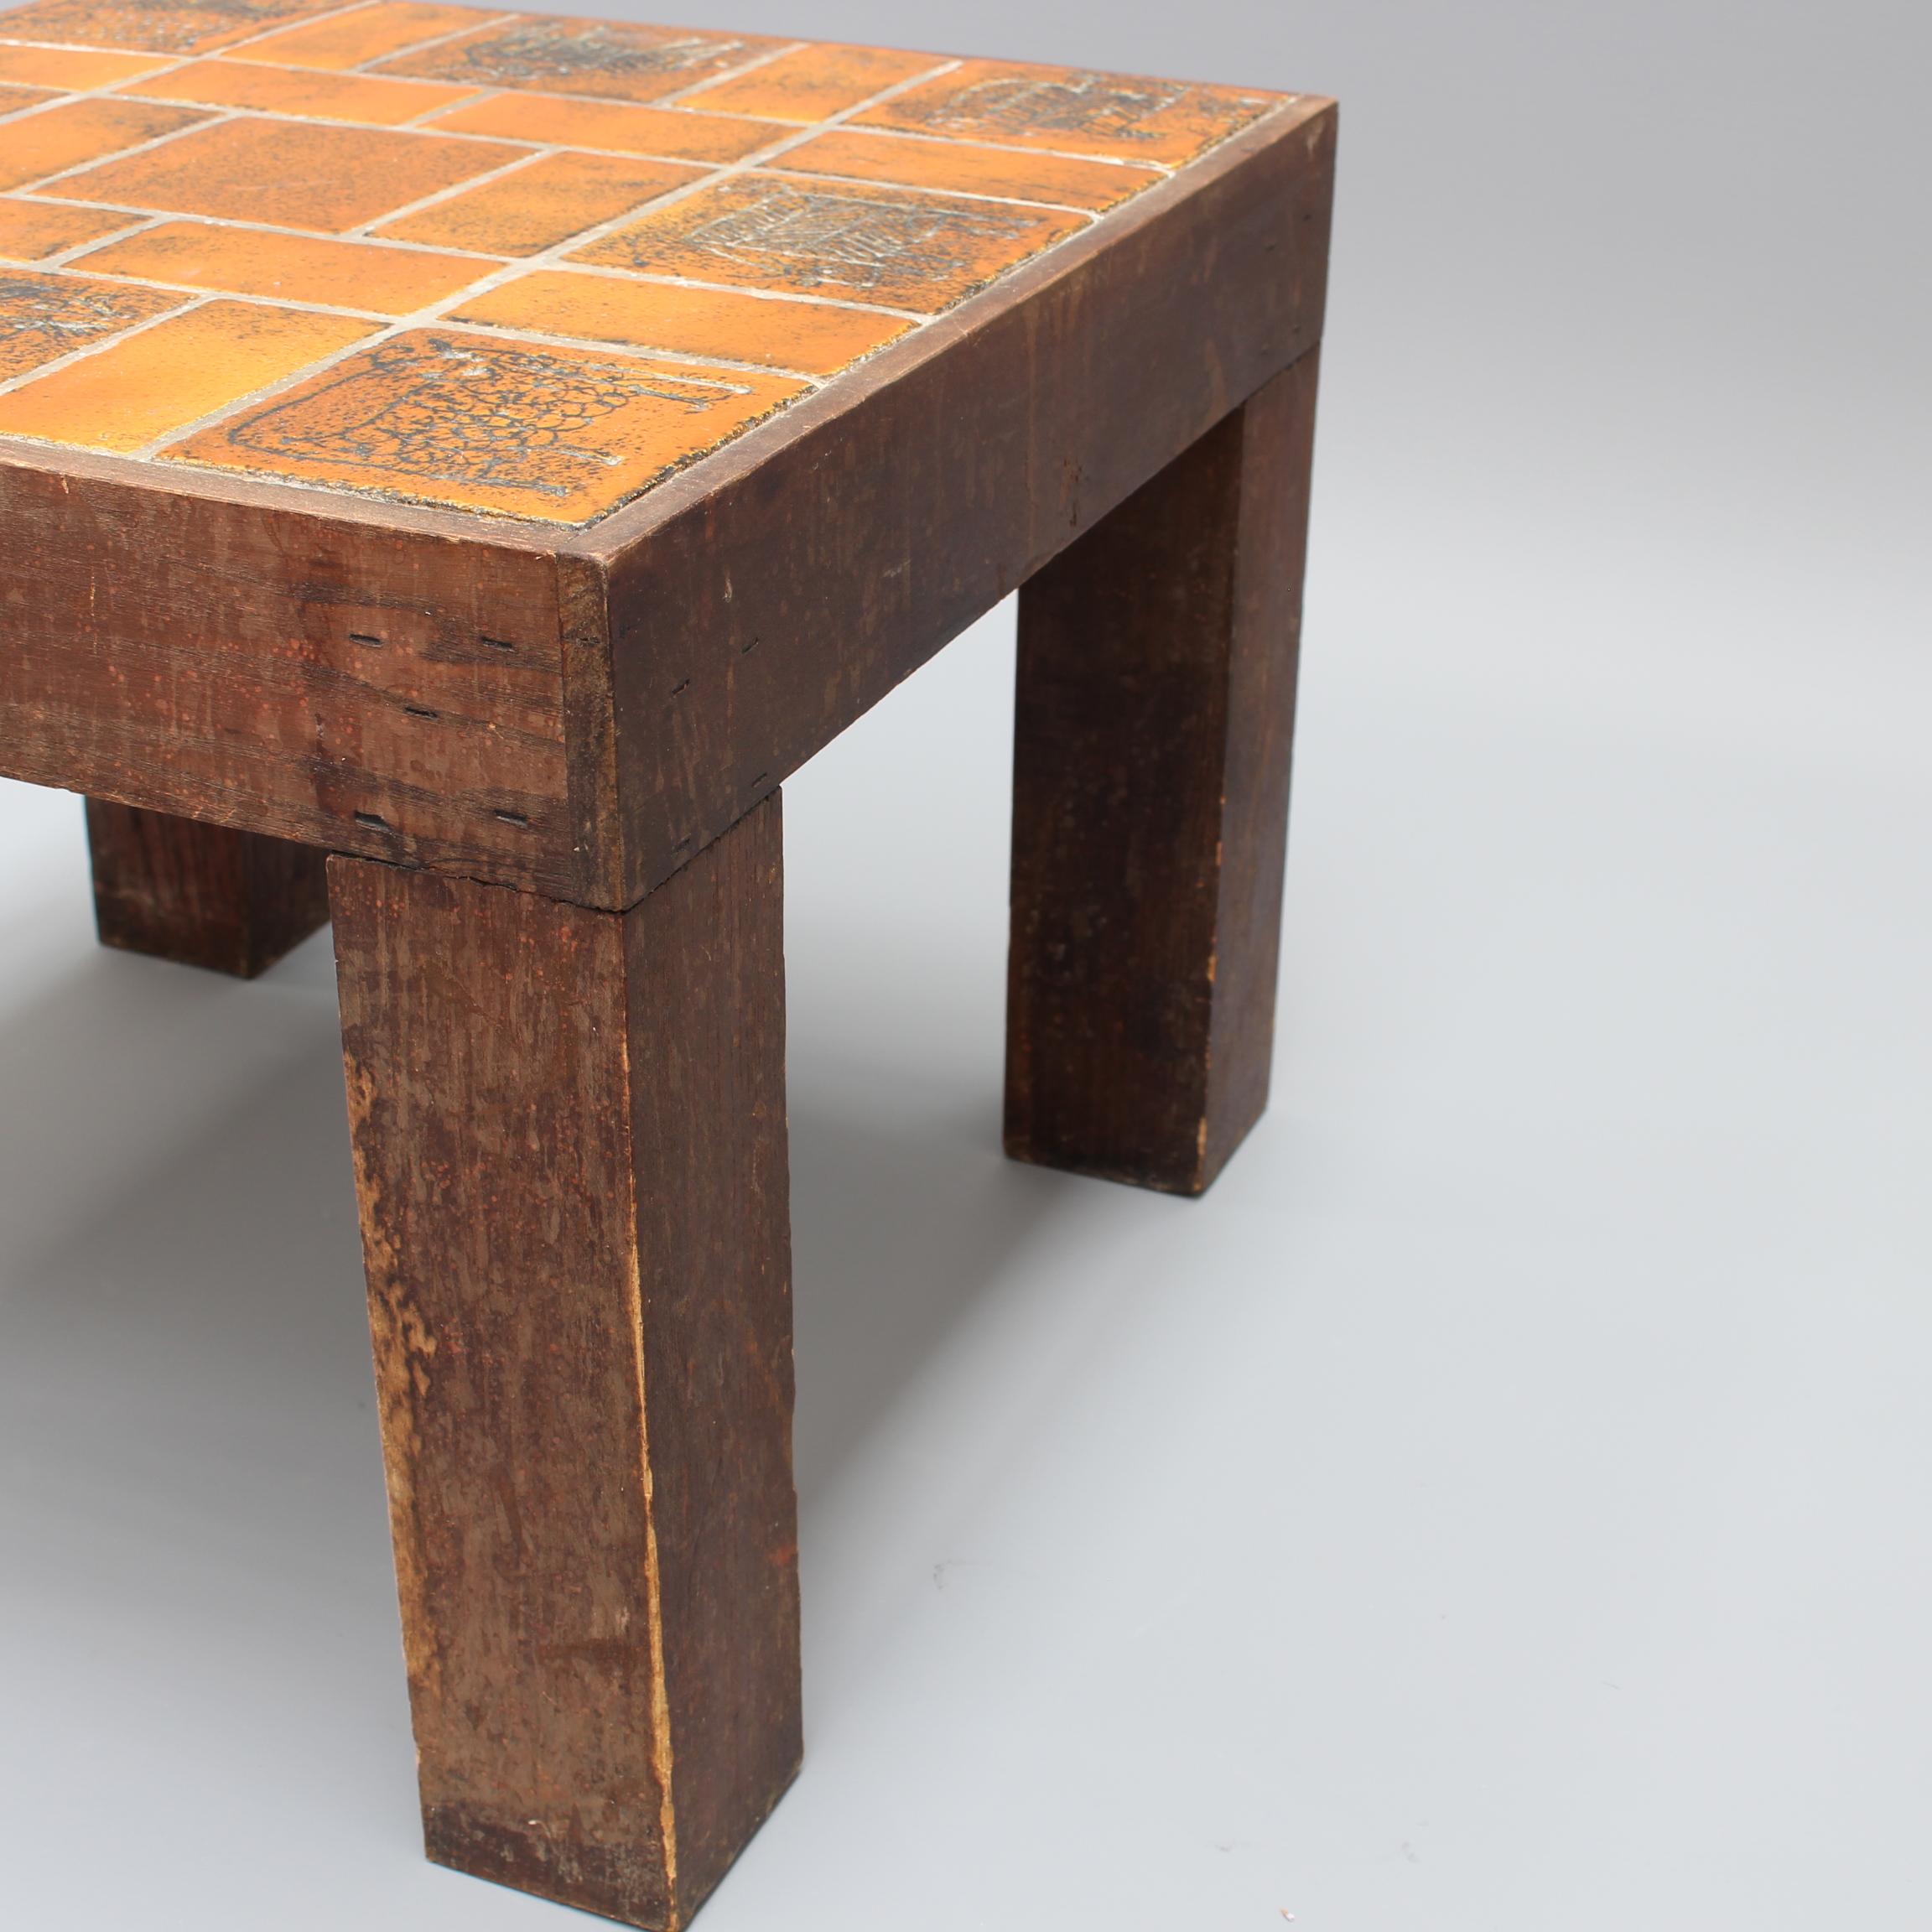 Vintage French Square Side Table with Ceramic Tile Top by Jacques Blin, c. 1950s For Sale 6